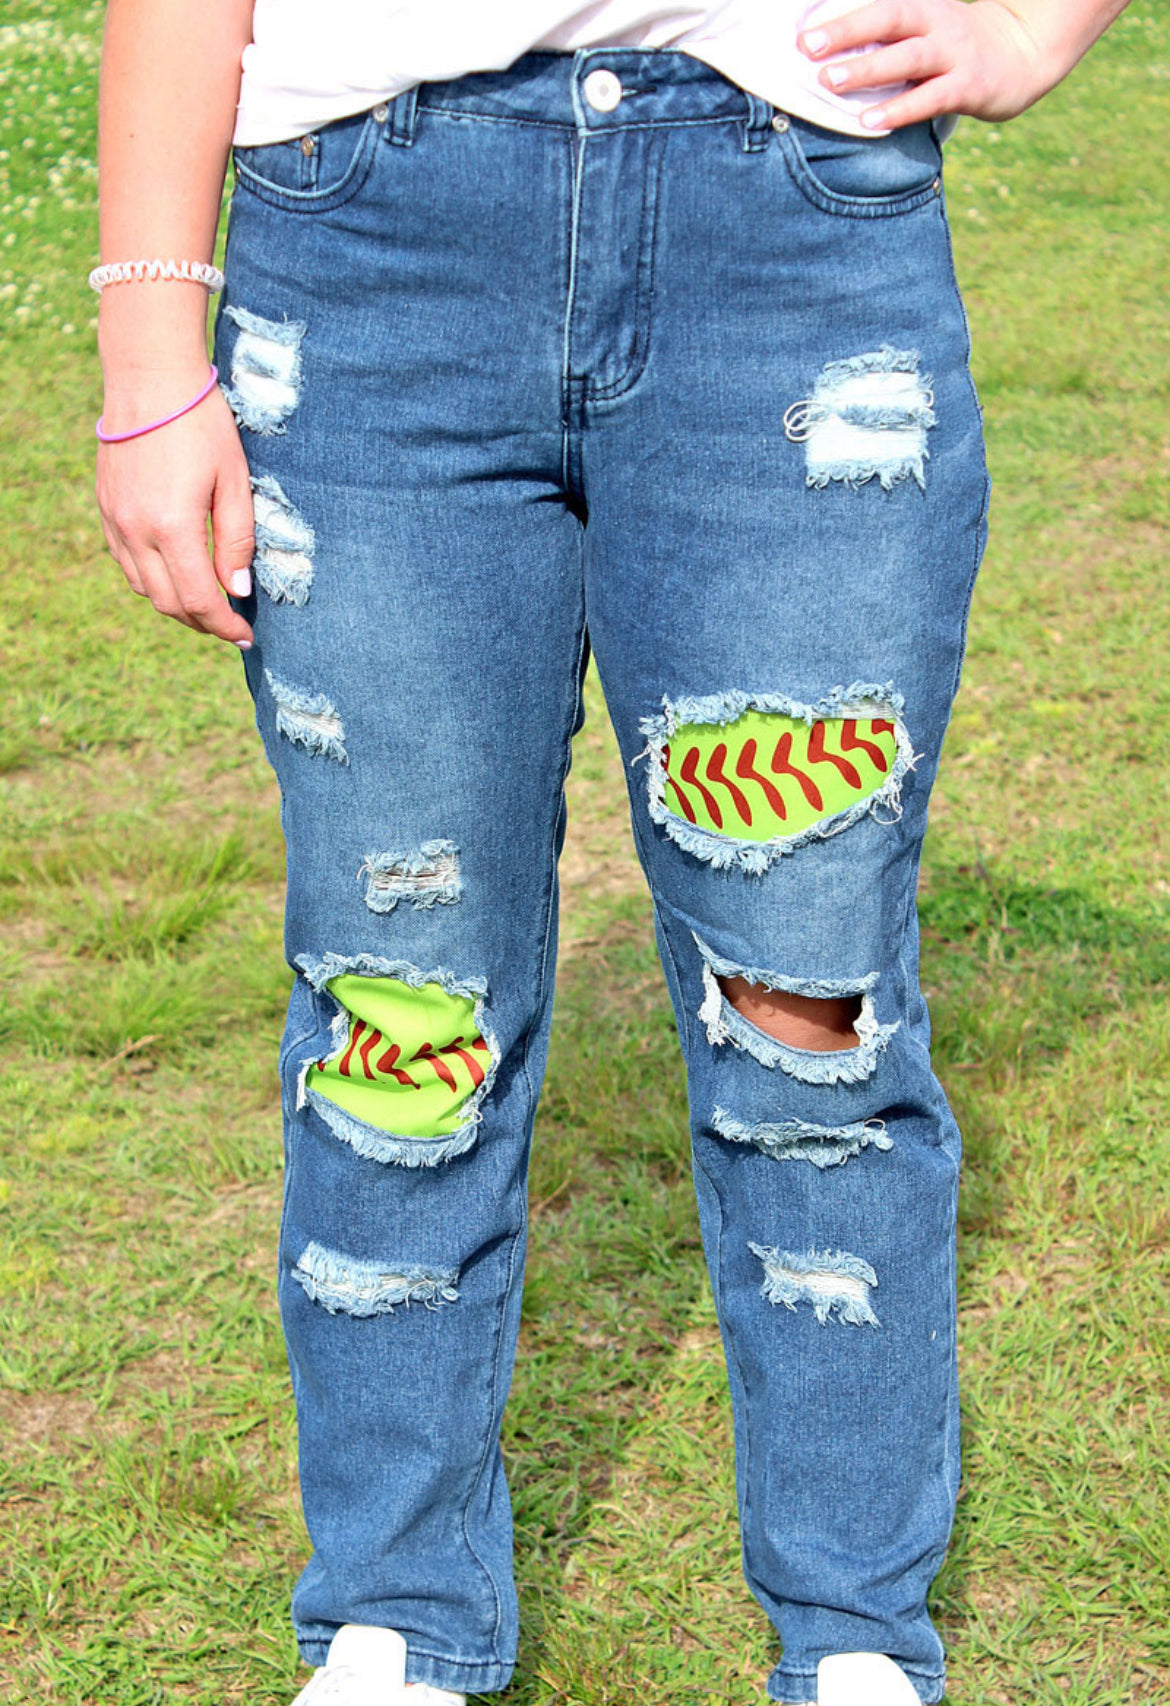 Mending: Functional Patches for Ripped Jeans - Frugal Upstate